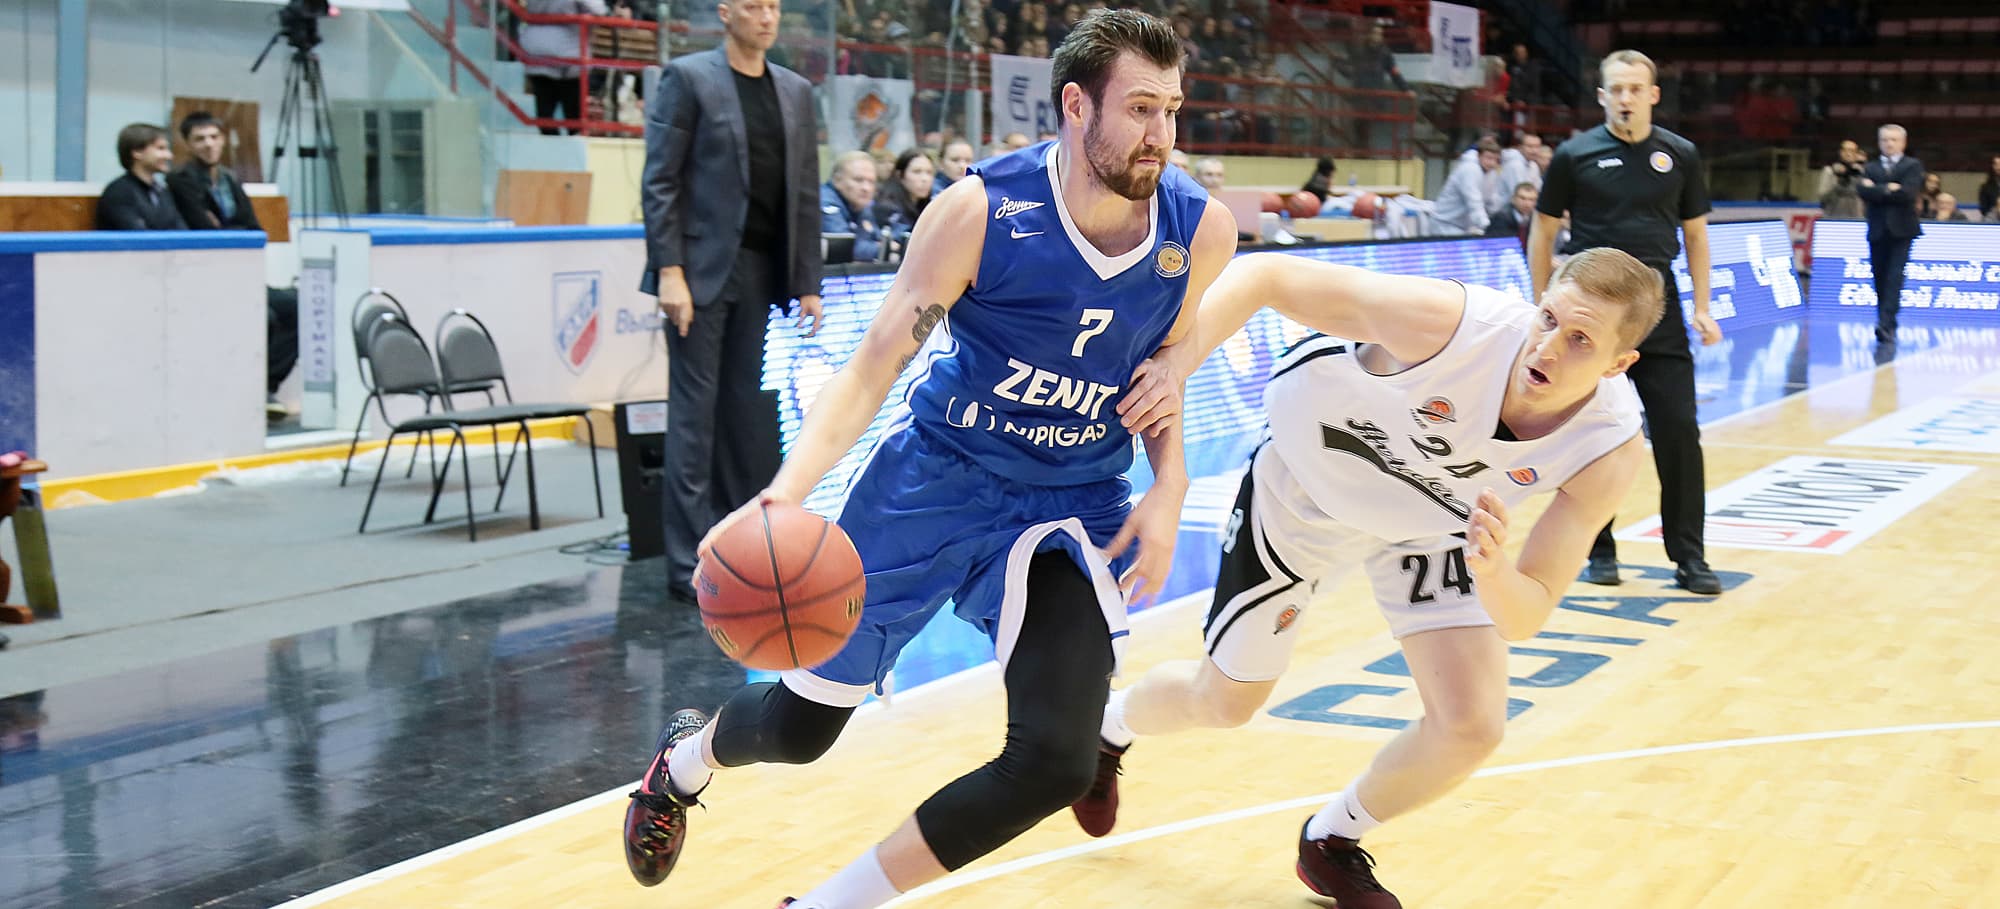 Karasev’s 34-Point Game Gives Him Player Of The Week Award